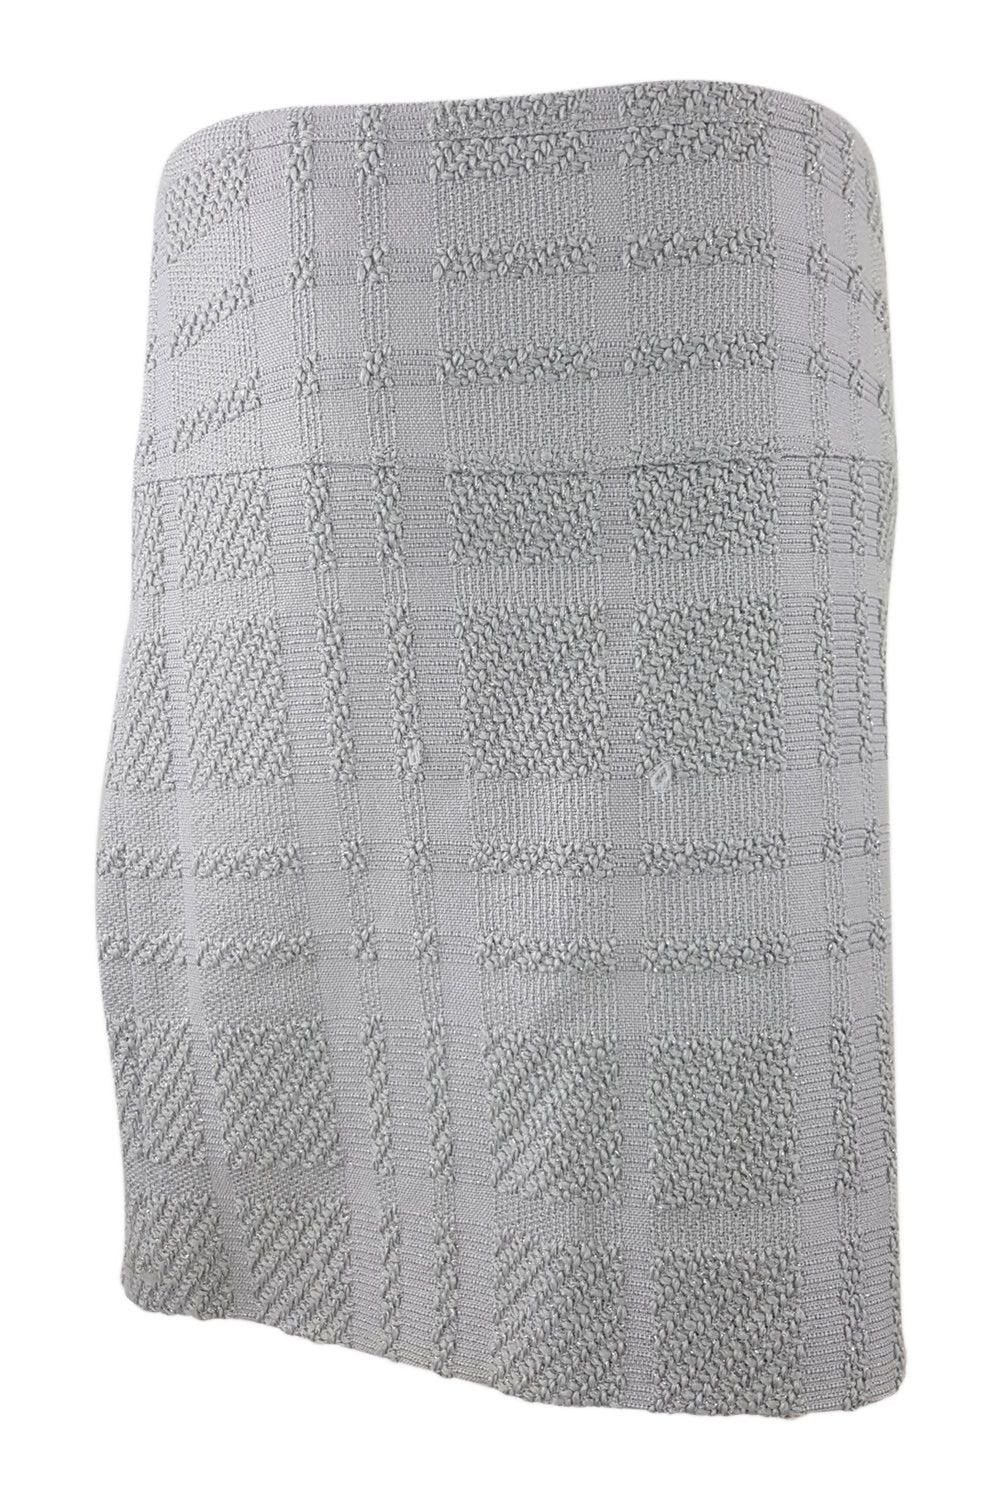 BURBERRY 100% Wool Self Checked Grey Skirt (M)-Burberry-The Freperie